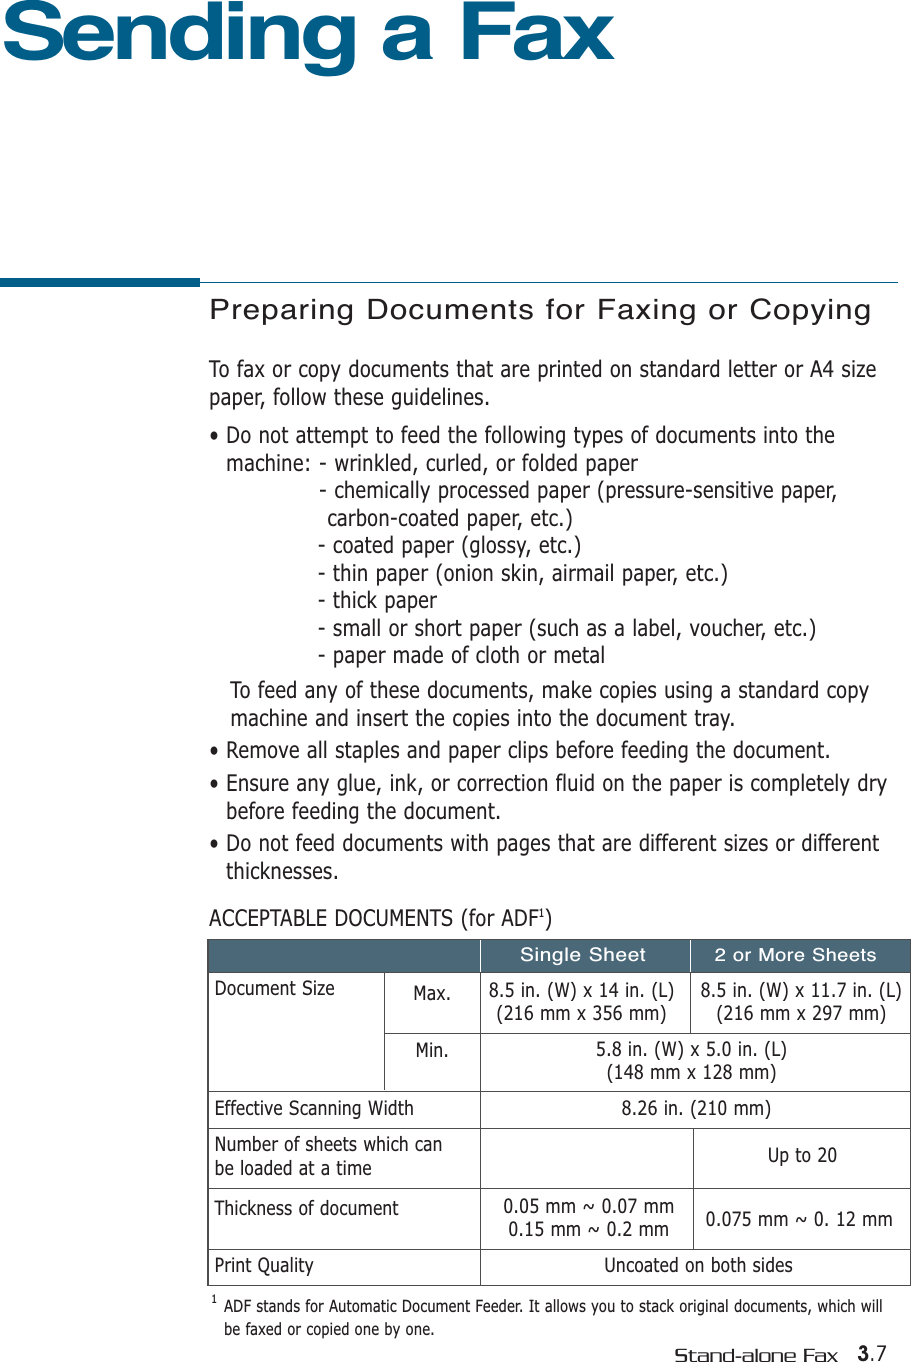 3.7Stand-alone FaxPreparing Documents for Faxing or CopyingTo fax or copy documents that are printed on standard letter or A4 sizepaper, follow these guidelines.• Do not attempt to feed the following types of documents into themachine: - wrinkled, curled, or folded paper- chemically processed paper (pressure-sensitive paper, carbon-coated paper, etc.)- coated paper (glossy, etc.)- thin paper (onion skin, airmail paper, etc.)- thick paper - small or short paper (such as a label, voucher, etc.)- paper made of cloth or metalTo feed any of these documents, make copies using a standard copymachine and insert the copies into the document tray.• Remove all staples and paper clips before feeding the document.• Ensure any glue, ink, or correction fluid on the paper is completely drybefore feeding the document.• Do not feed documents with pages that are different sizes or differentthicknesses.ACCEPTABLE DOCUMENTS (for ADF1)Sending a FaxEffective Scanning WidthNumber of sheets which can be loaded at a timeThickness of documentPrint QualityDocument Size Max.Min.8.5 in. (W) x 11.7 in. (L)(216 mm x 297 mm)8.5 in. (W) x 14 in. (L)(216 mm x 356 mm)5.8 in. (W) x 5.0 in. (L)(148 mm x 128 mm)8.26 in. (210 mm)Uncoated on both sidesUp to 200.05 mm ~ 0.07 mm0.15 mm ~ 0.2 mm 0.075 mm ~ 0. 12 mmSingle Sheet2 or More Sheets1  ADF stands for Automatic Document Feeder. It allows you to stack original documents, which willbe faxed or copied one by one.